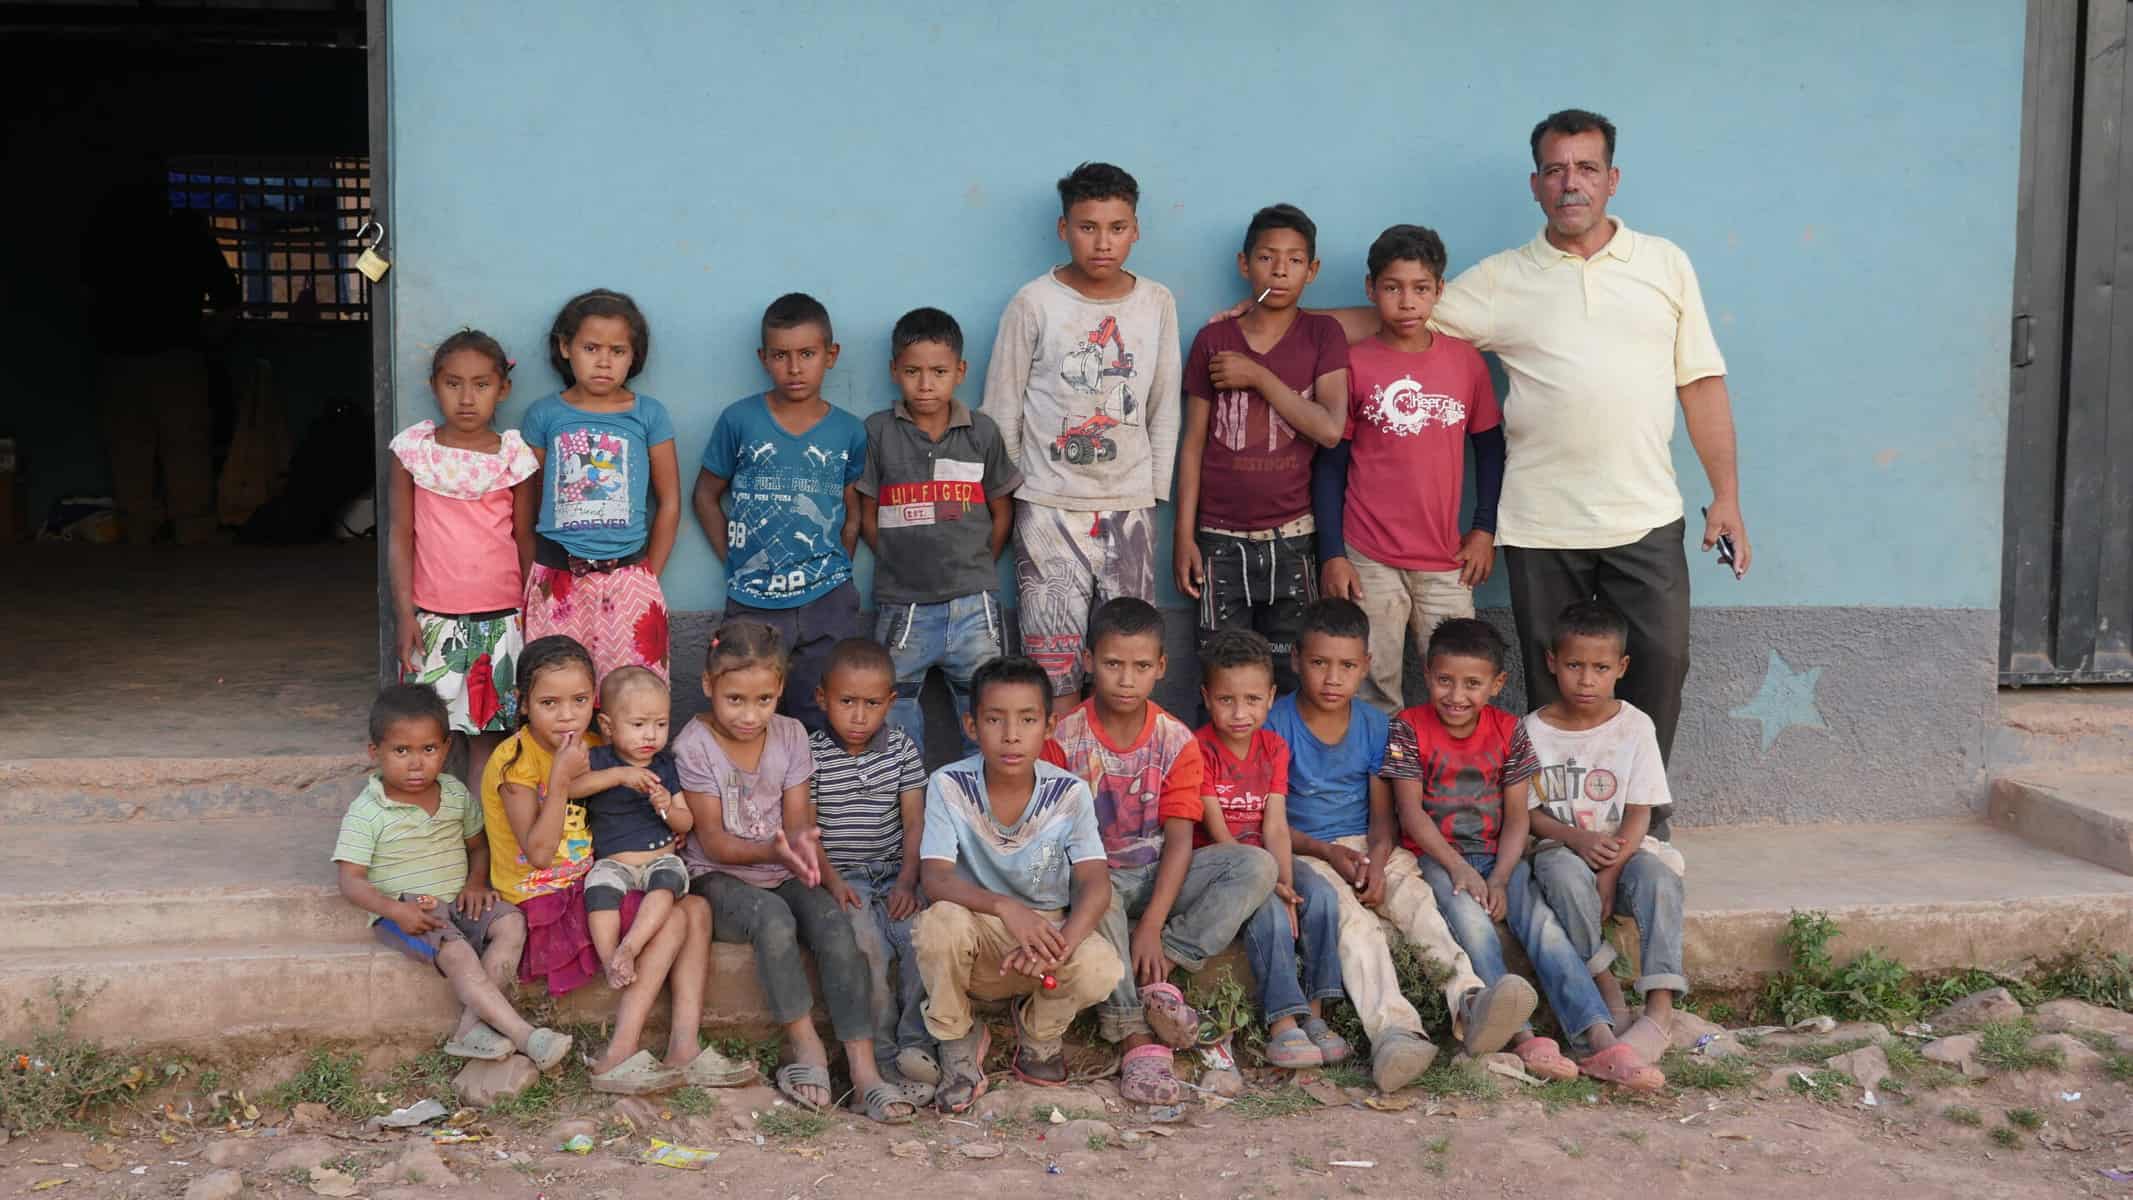 The Tolupan village of Monte Rey, seen here is their school with 18 children sitting and standing outside of the blue painted school building.